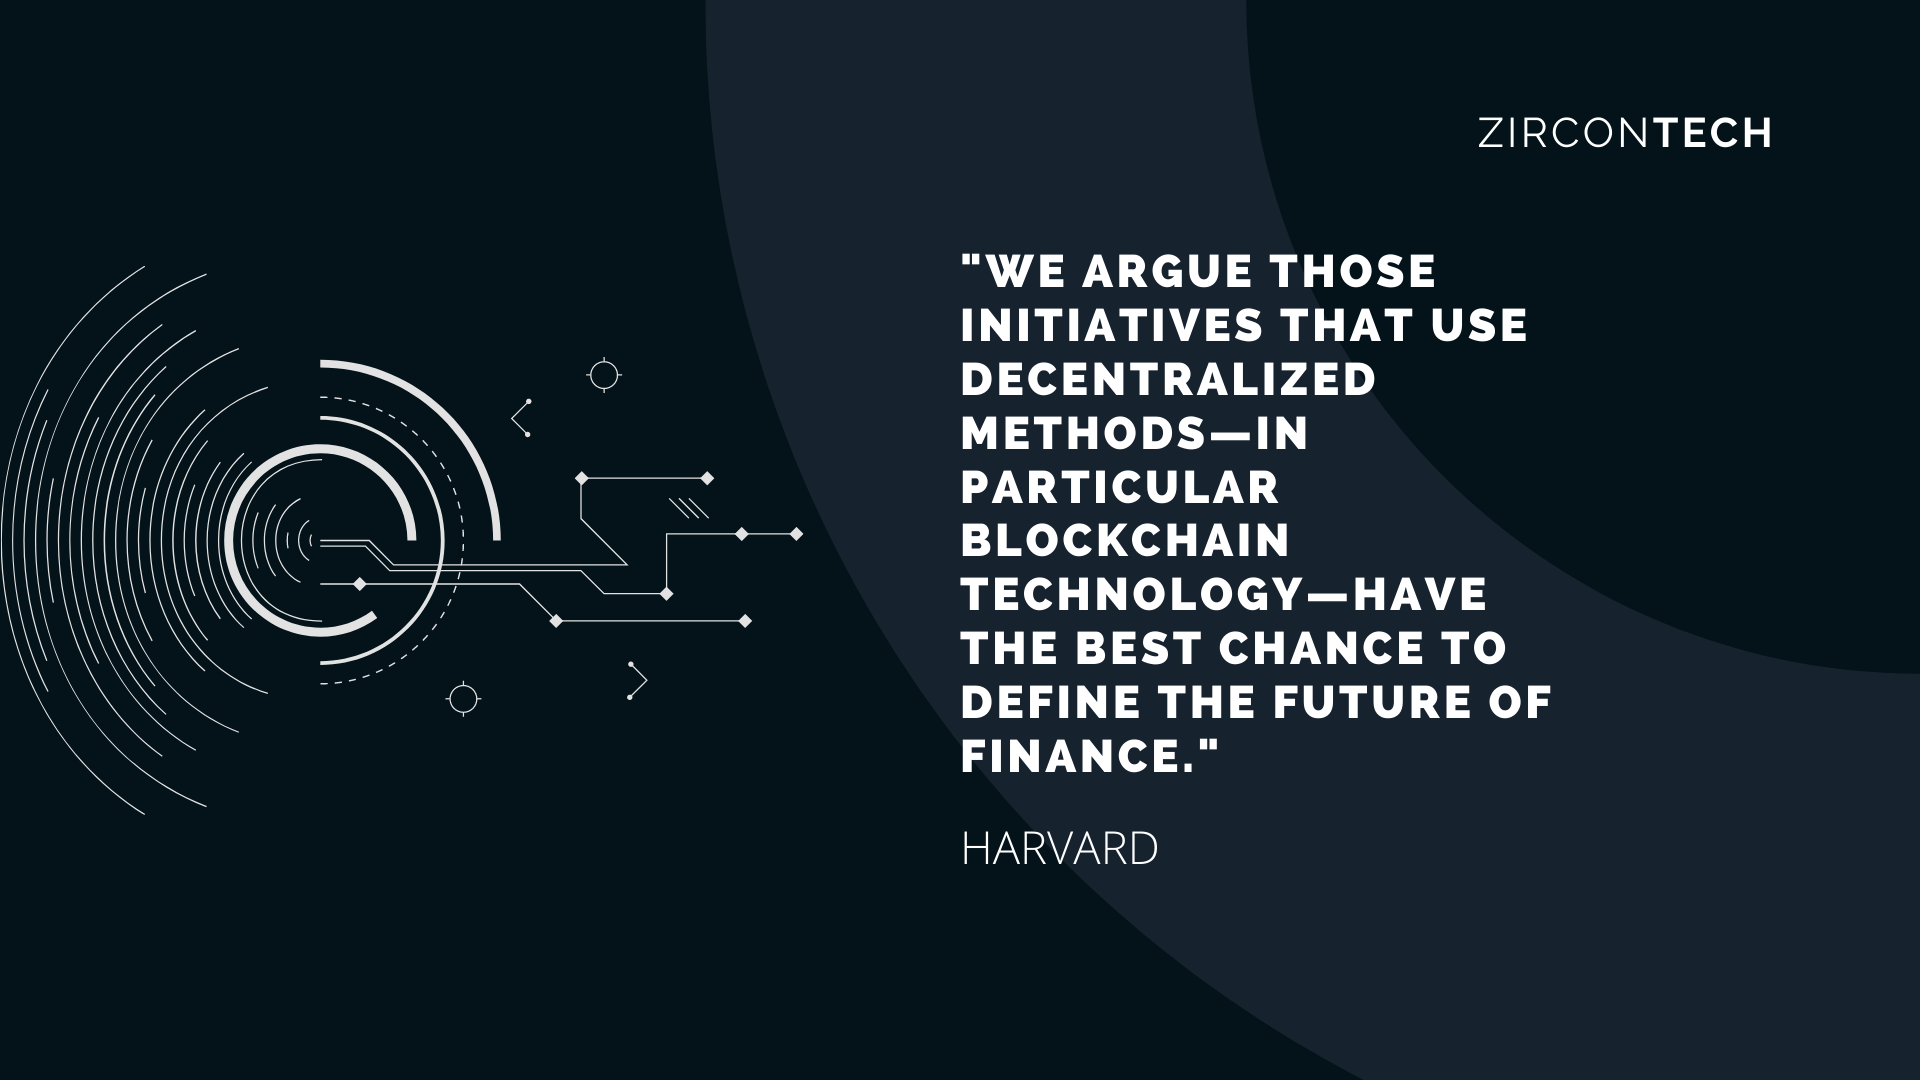 Blockchain technology and the chance to define, through decentralized methods, the future of finance